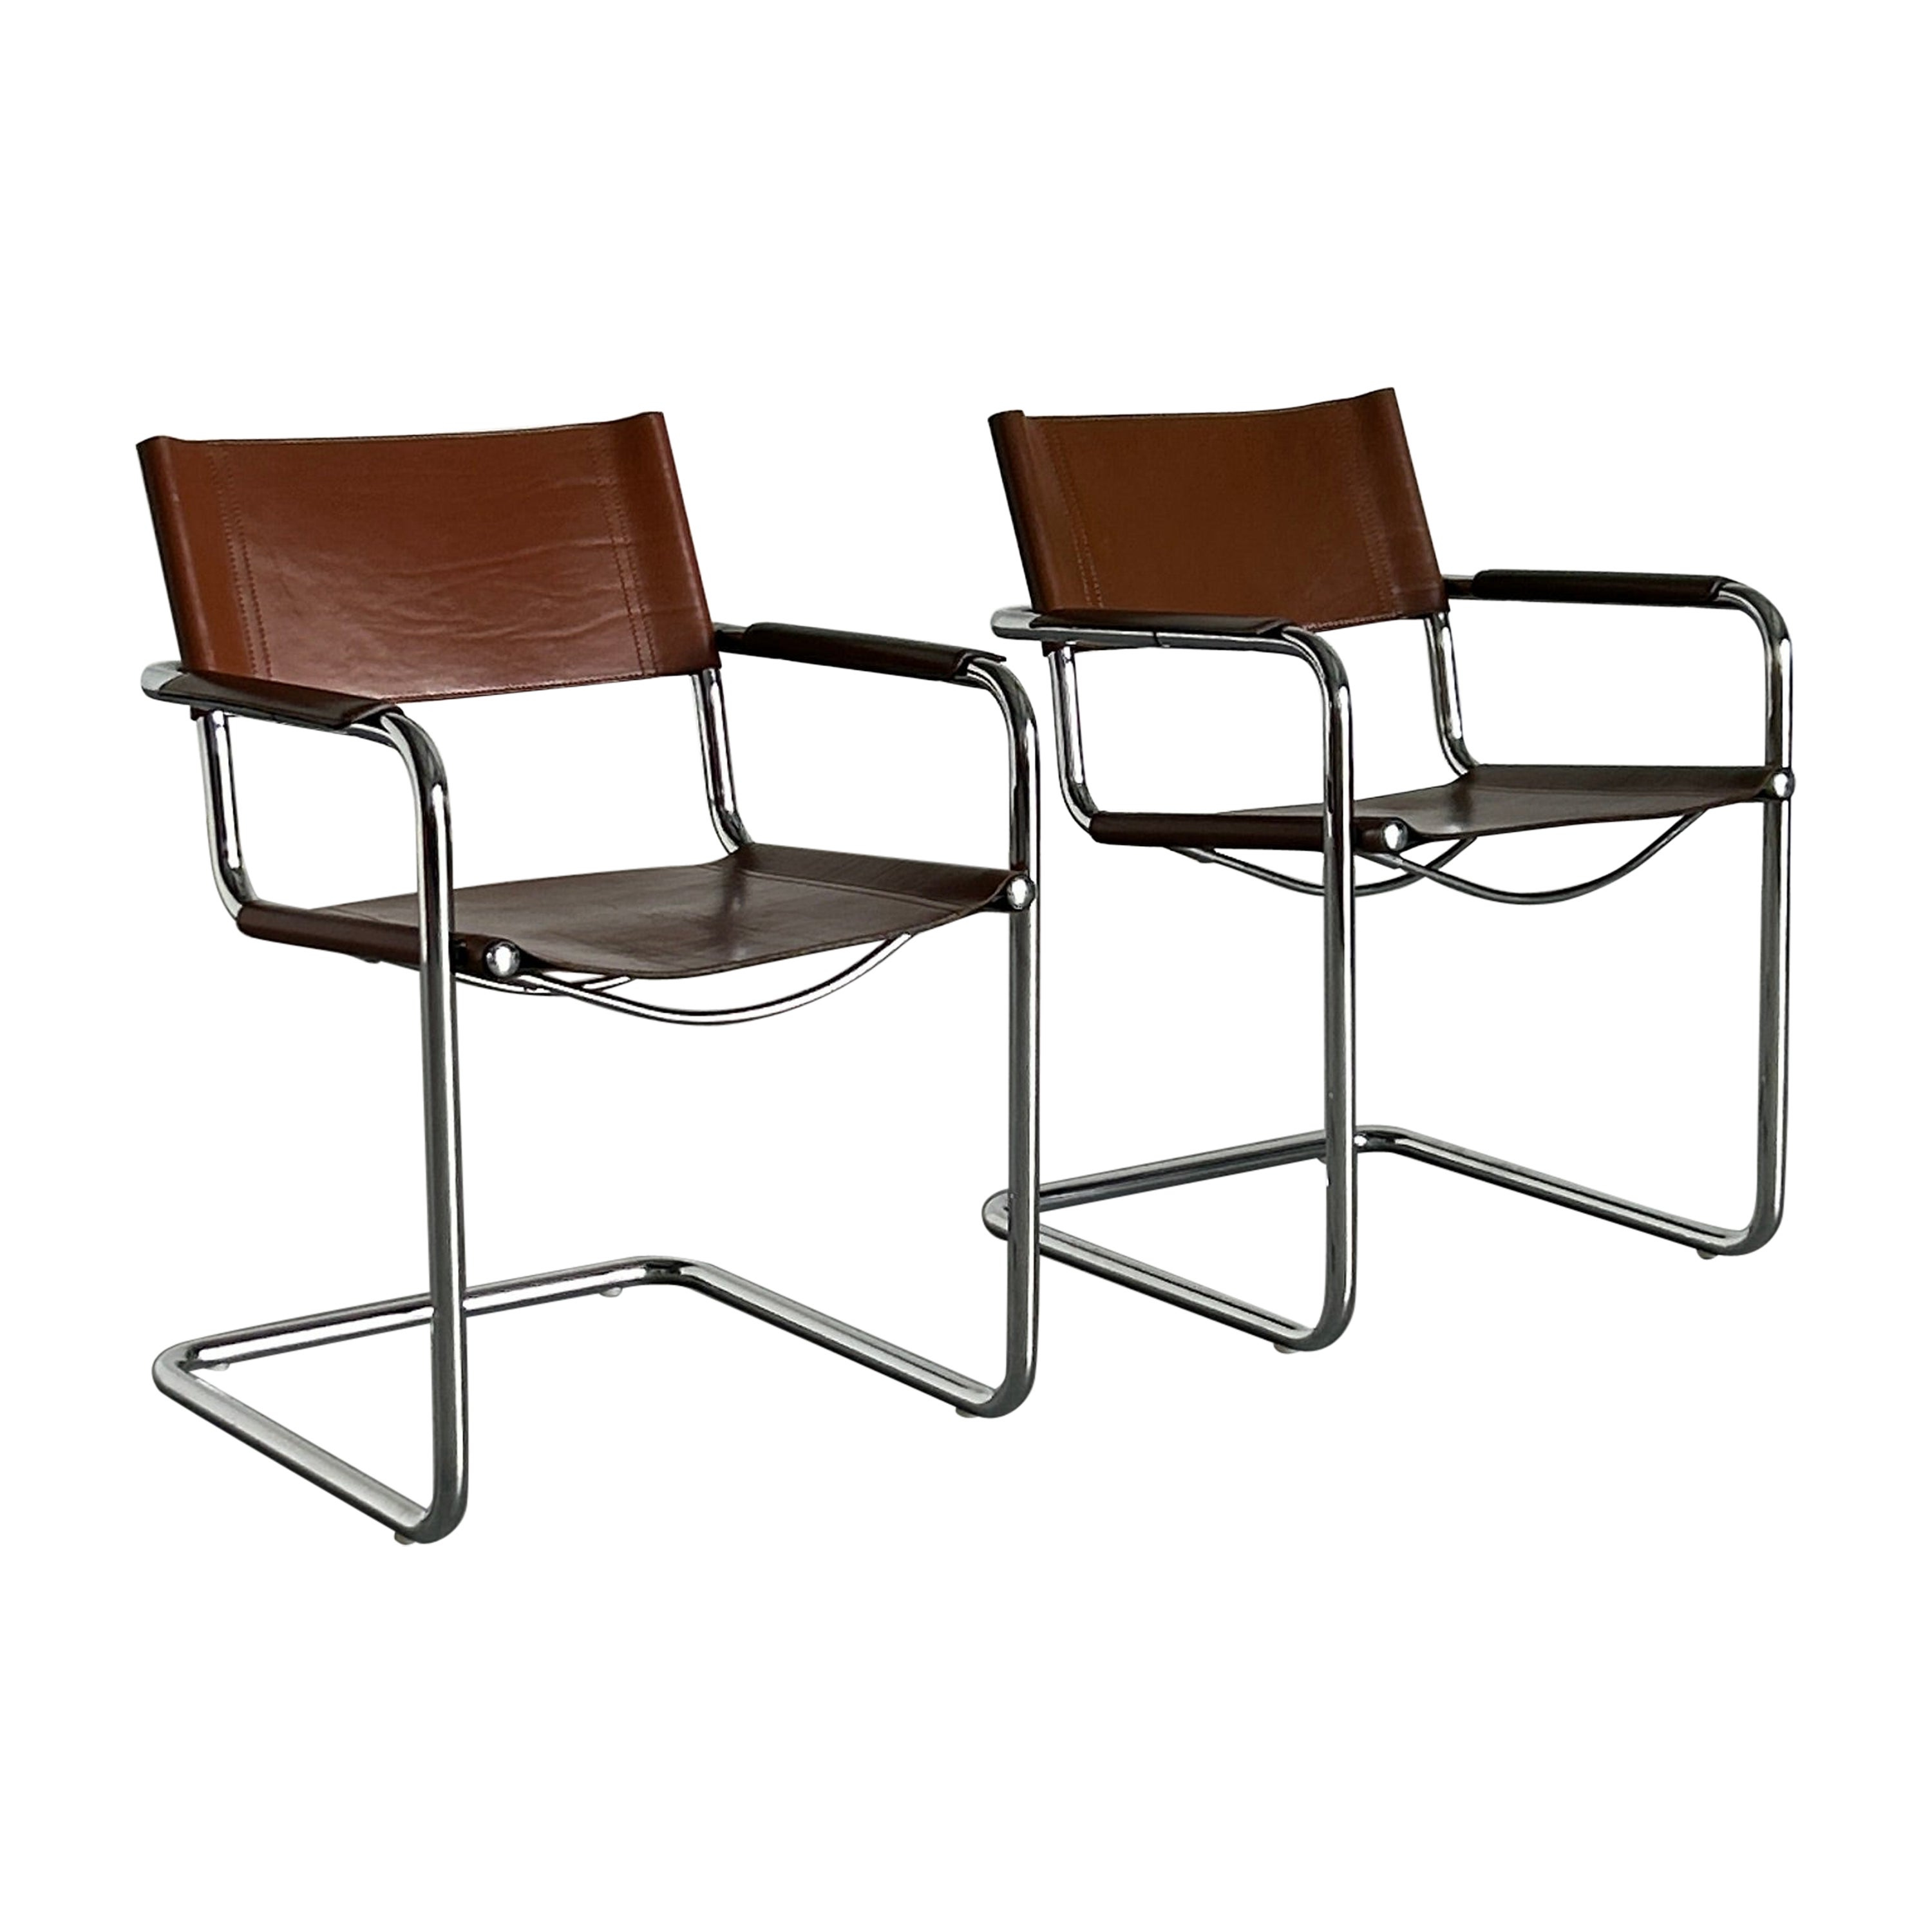 Pair of Vintage Original 'MG5' Armchairs by Centro Studi for Matteo Grassi